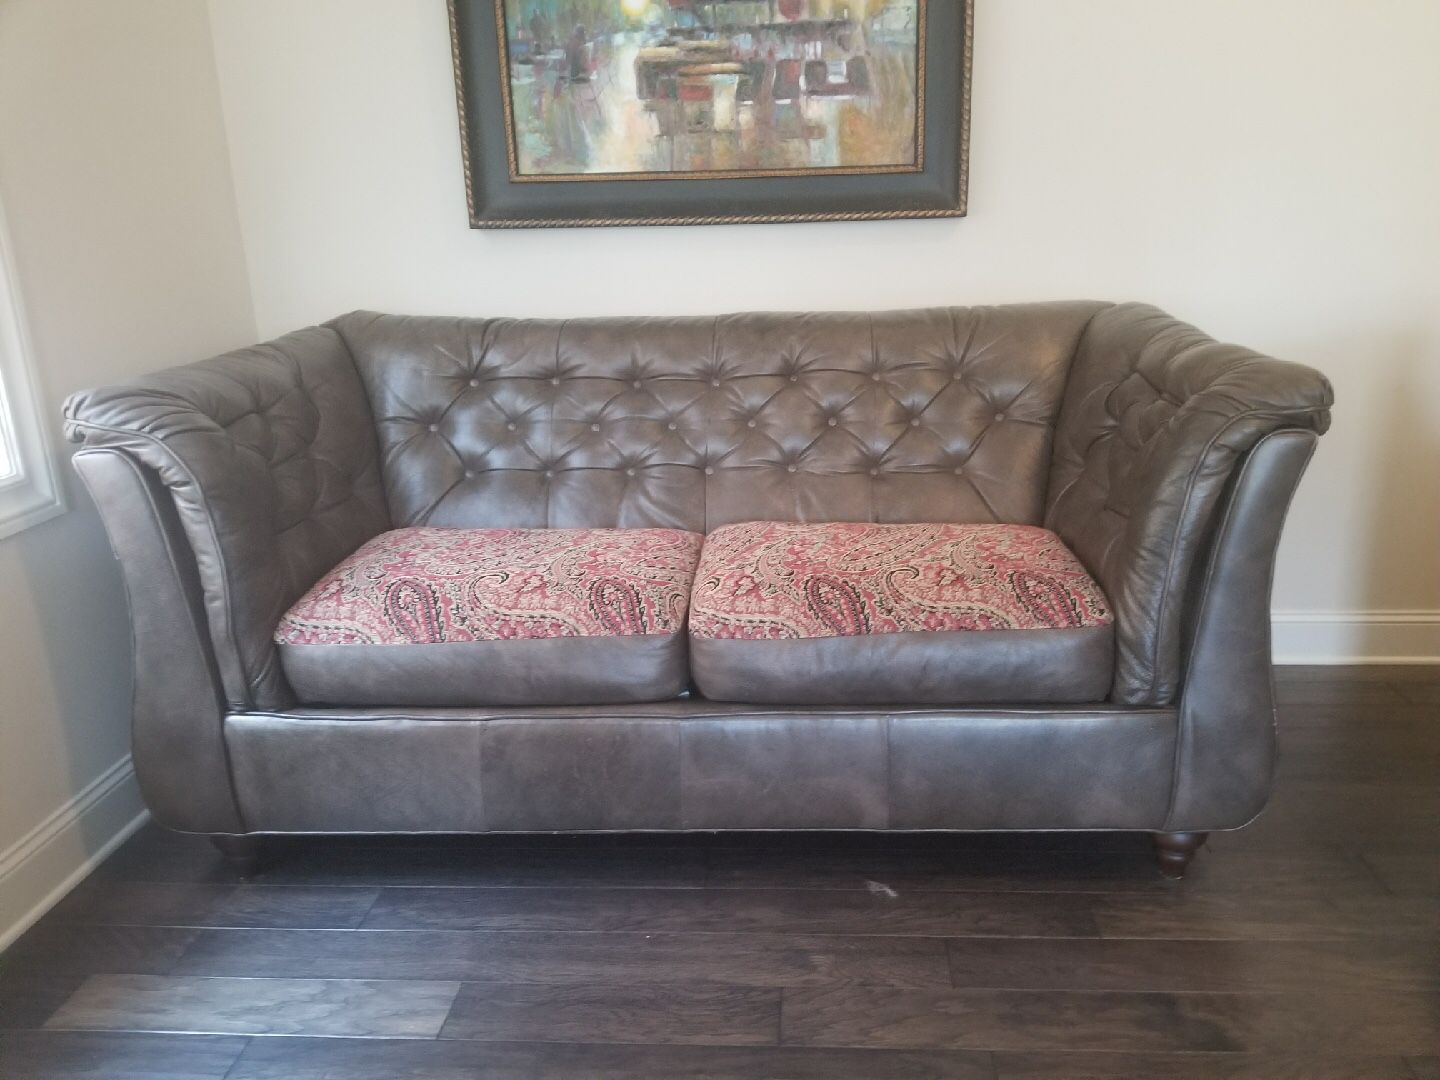 NEED GONE ASAP - MAKE AN OFFER! Great Condition Leather Couch with Covered Cushions